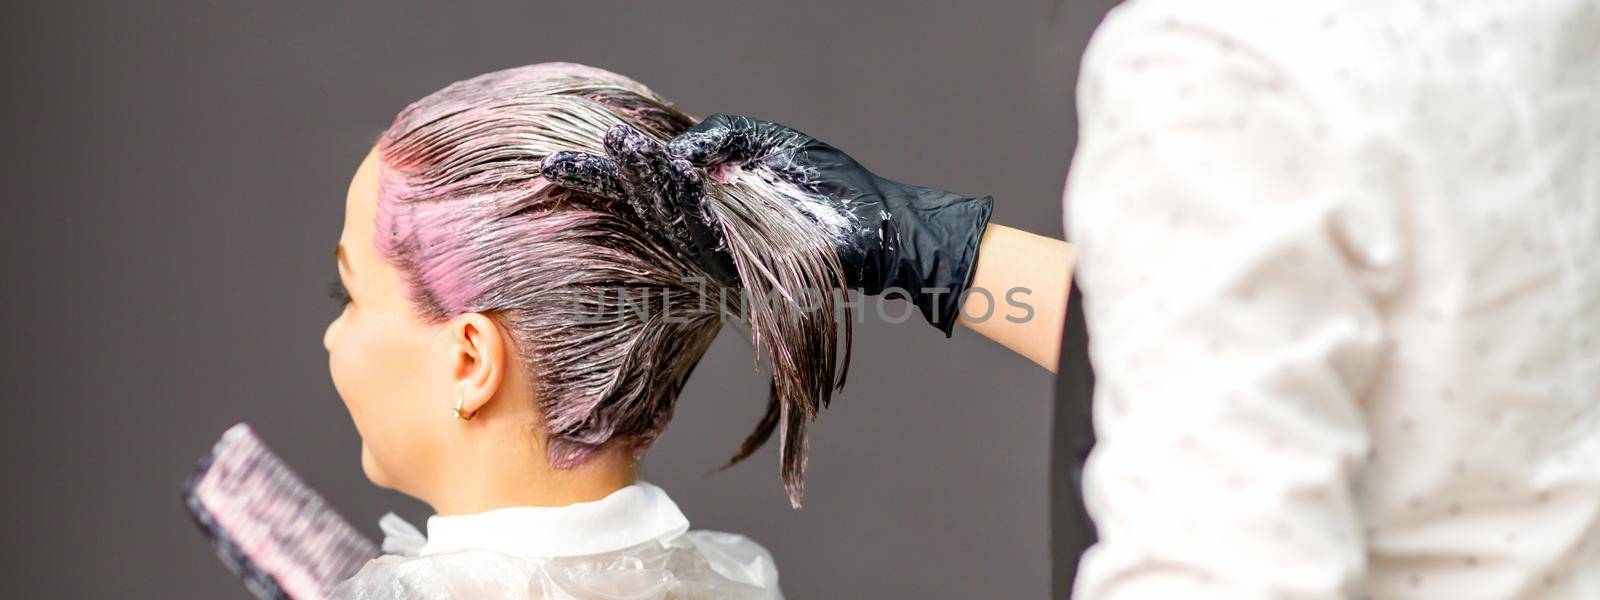 Female hairdresser dyeing hair of young caucasian woman in hair salon